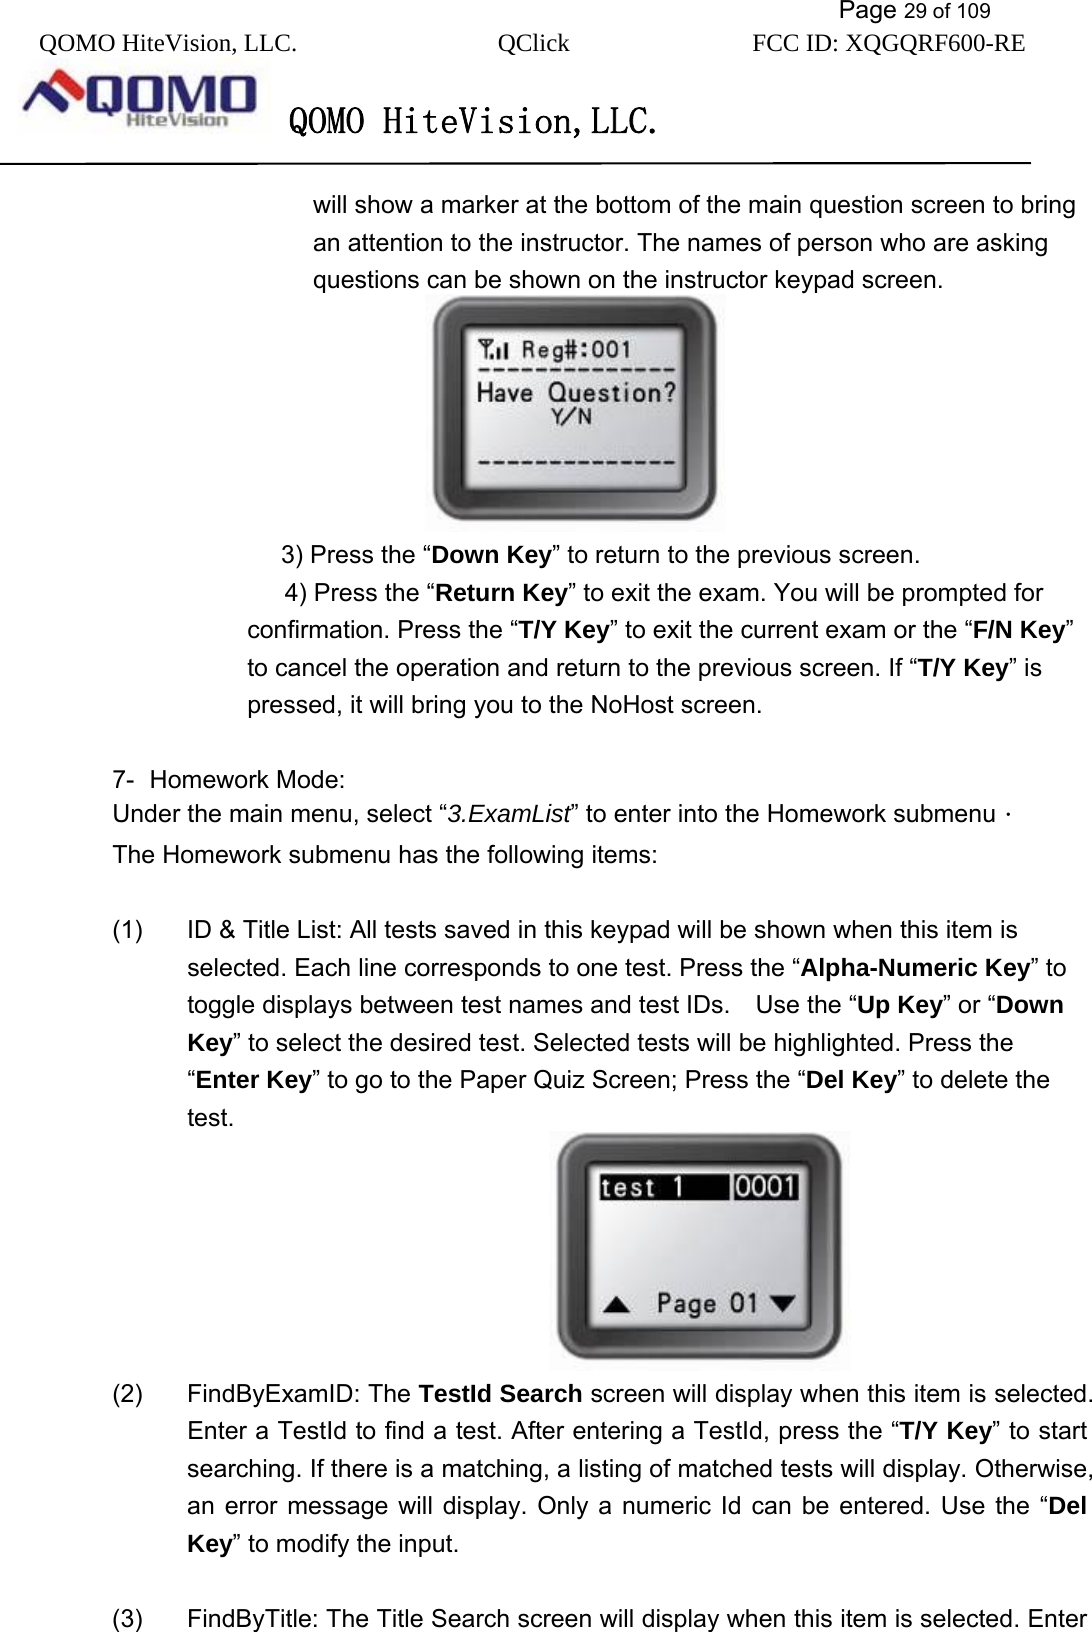           Page 29 of 109 QOMO HiteVision, LLC.  QClick        FCC ID: XQGQRF600-RE     QOMO HiteVision,LLC.   will show a marker at the bottom of the main question screen to bring an attention to the instructor. The names of person who are asking questions can be shown on the instructor keypad screen.                                   3) Press the “Down Key” to return to the previous screen.    4) Press the “Return Key” to exit the exam. You will be prompted for confirmation. Press the “T/Y Key” to exit the current exam or the “F/N Key” to cancel the operation and return to the previous screen. If “T/Y Key” is pressed, it will bring you to the NoHost screen.   7- Homework Mode: Under the main menu, select “3.ExamList” to enter into the Homework submenu． The Homework submenu has the following items:        (1)  ID &amp; Title List: All tests saved in this keypad will be shown when this item is selected. Each line corresponds to one test. Press the “Alpha-Numeric Key” to toggle displays between test names and test IDs.    Use the “Up Key” or “Down Key” to select the desired test. Selected tests will be highlighted. Press the “Enter Key” to go to the Paper Quiz Screen; Press the “Del Key” to delete the test.                                (2) FindByExamID: The TestId Search screen will display when this item is selected. Enter a TestId to find a test. After entering a TestId, press the “T/Y Key” to start searching. If there is a matching, a listing of matched tests will display. Otherwise, an error message will display. Only a numeric Id can be entered. Use the “Del Key” to modify the input.     (3)  FindByTitle: The Title Search screen will display when this item is selected. Enter 